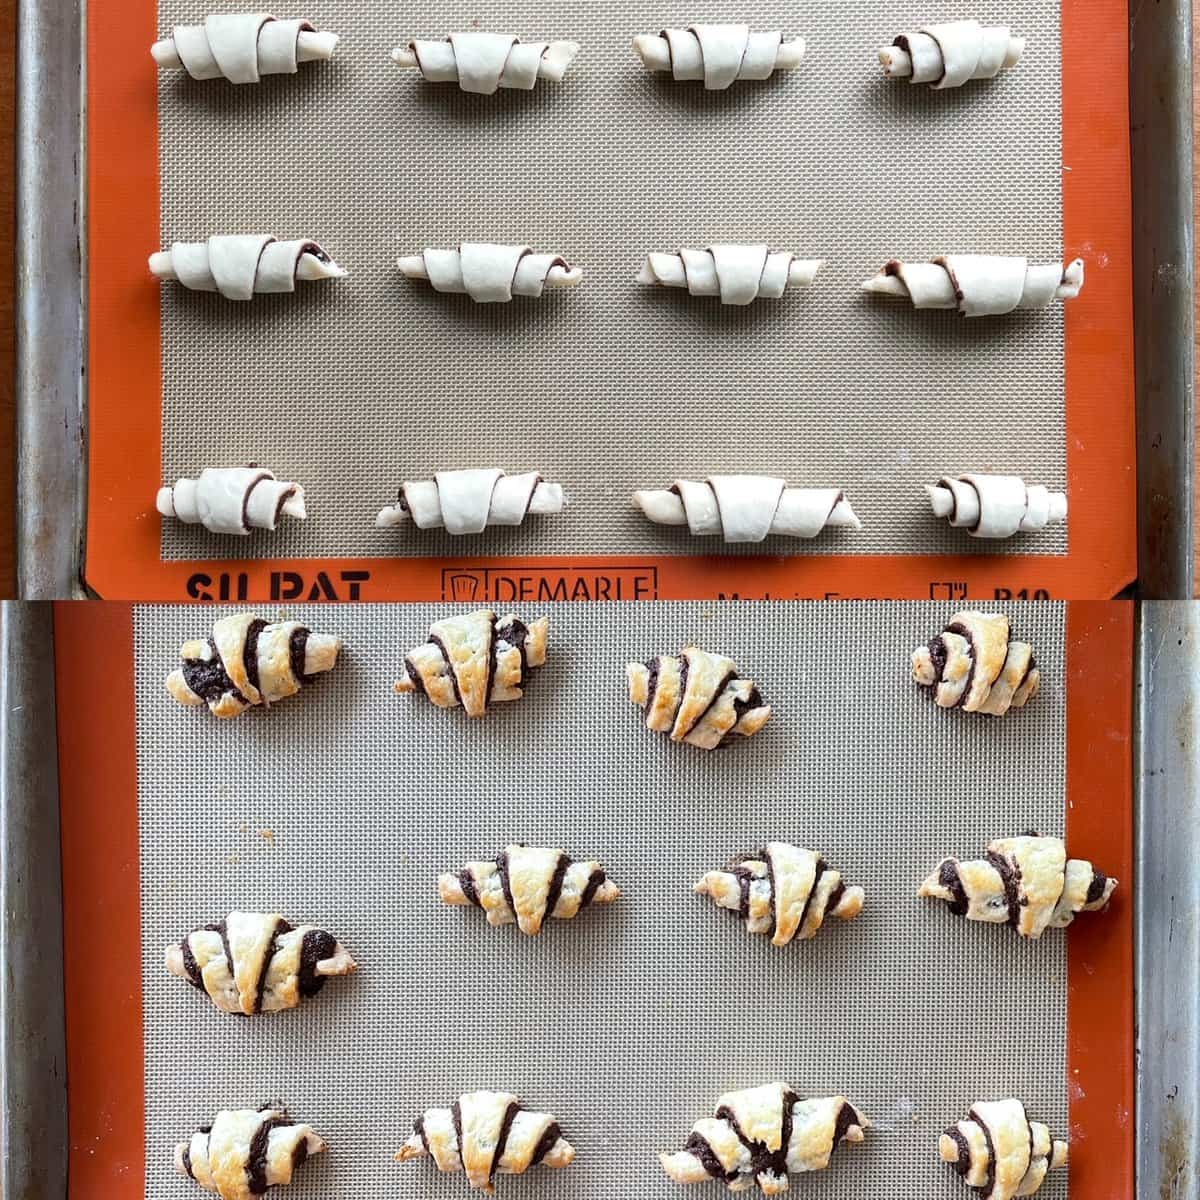 two panels showing the unbaked and baked chocolate rugelach on baking sheets.